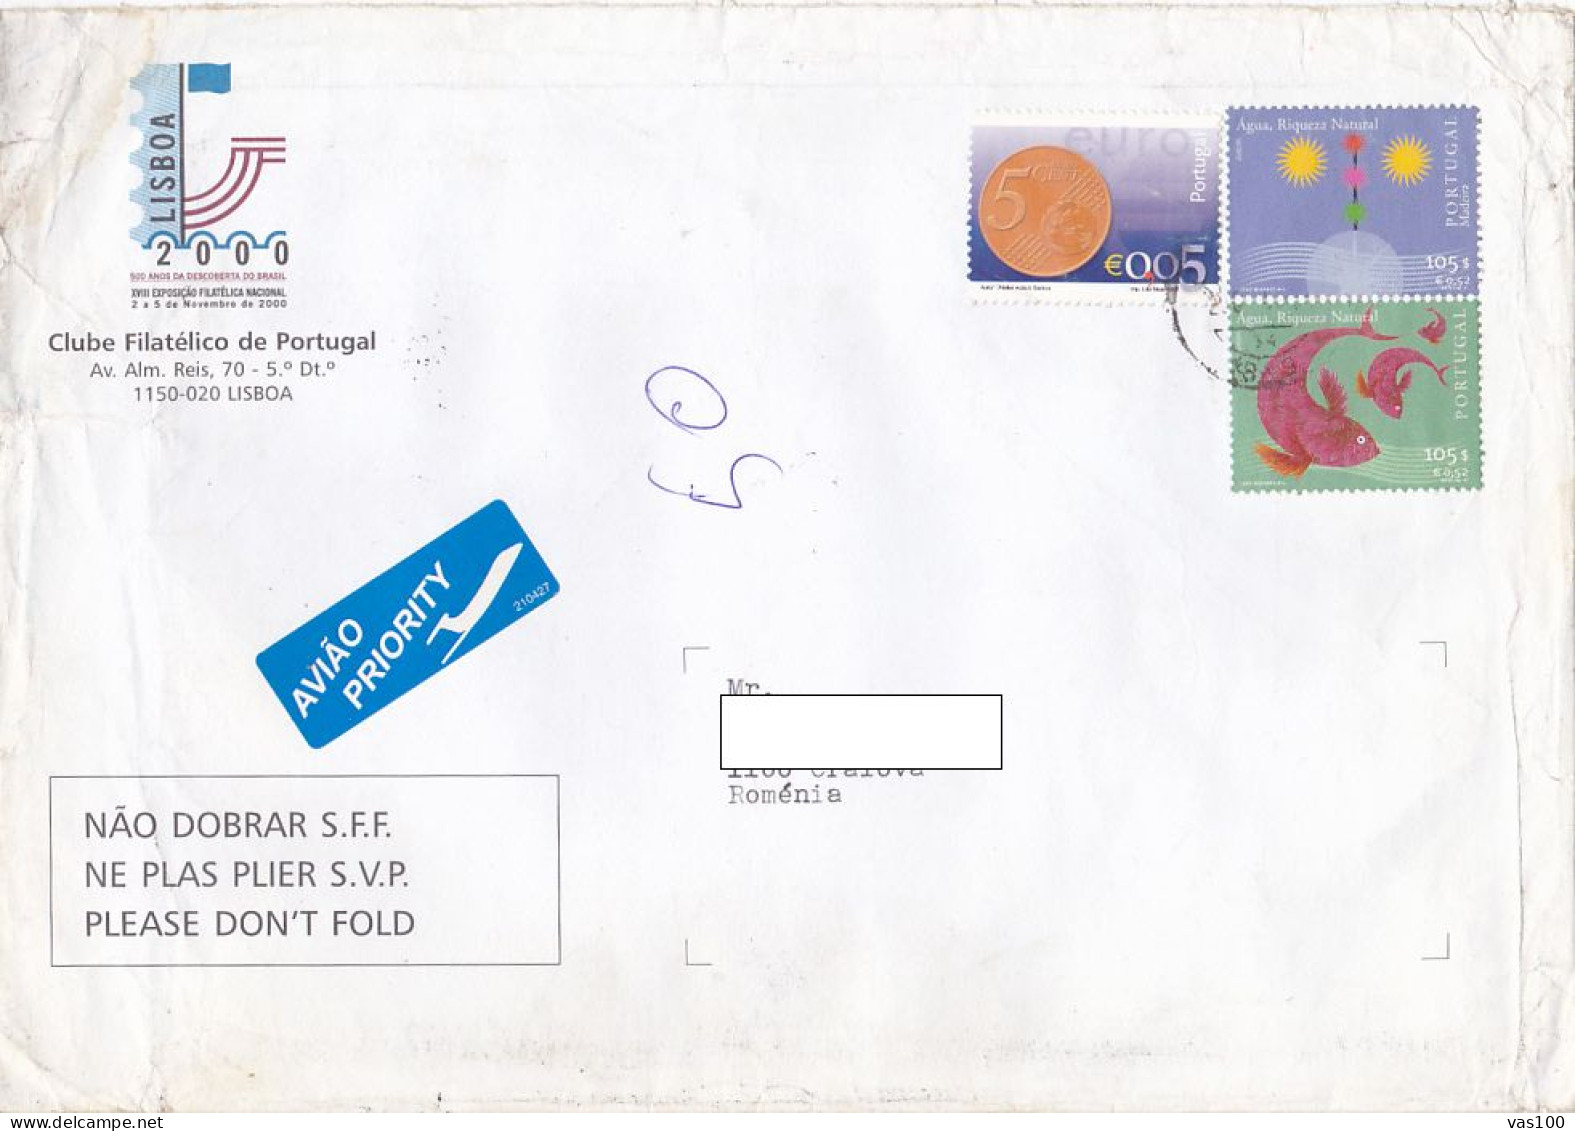 EURO CURRENCY, COIN, SAVE WATER, FISH, STAMPS ON COVER, 2002, PORTUGAL - Cartas & Documentos